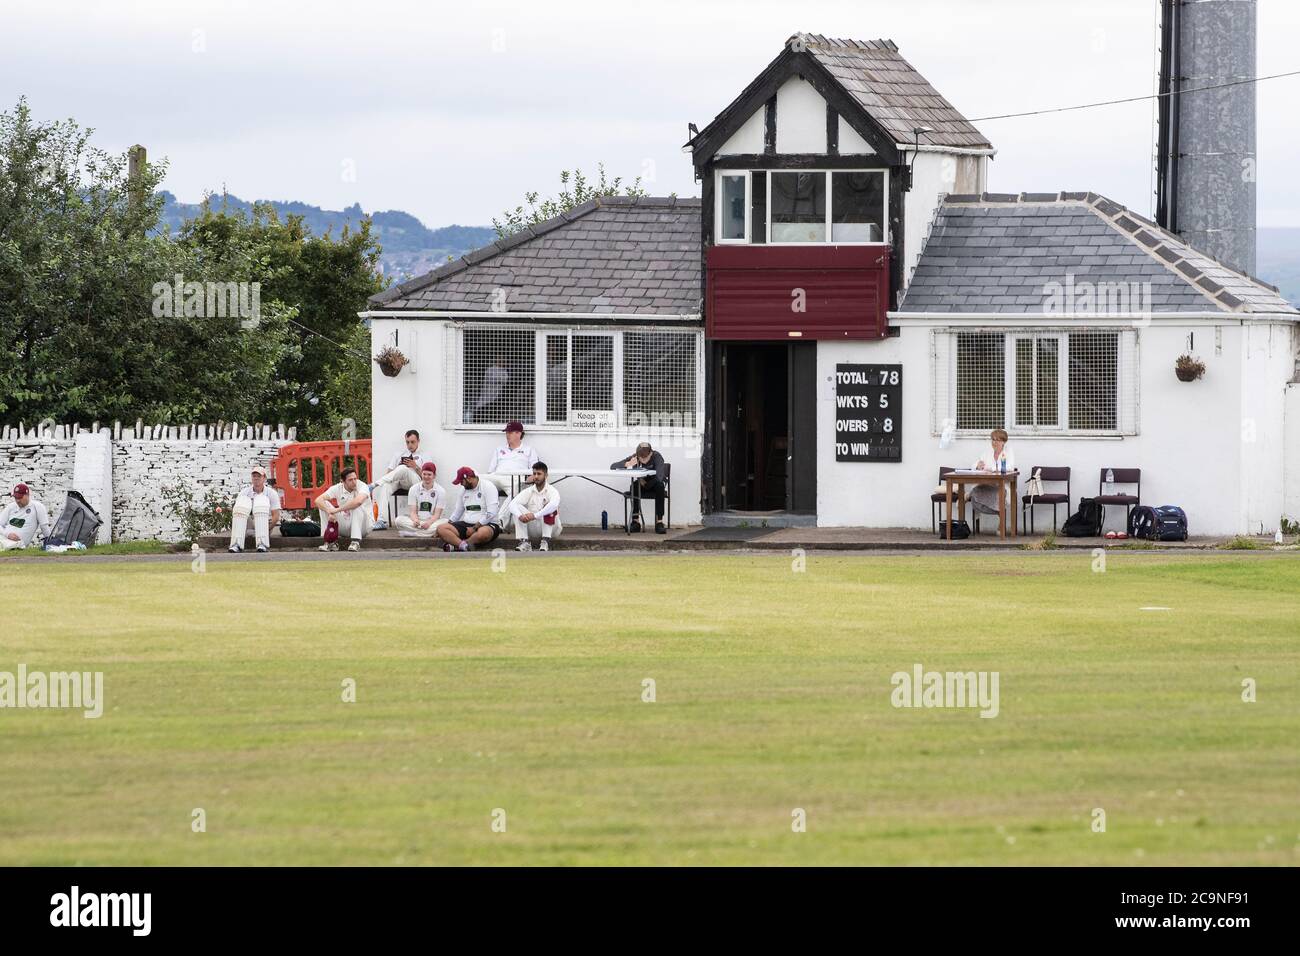 A cricket pavilion with the batting side and scorers watching the game in progress at a local village cricket match in West Yorkshire Stock Photo